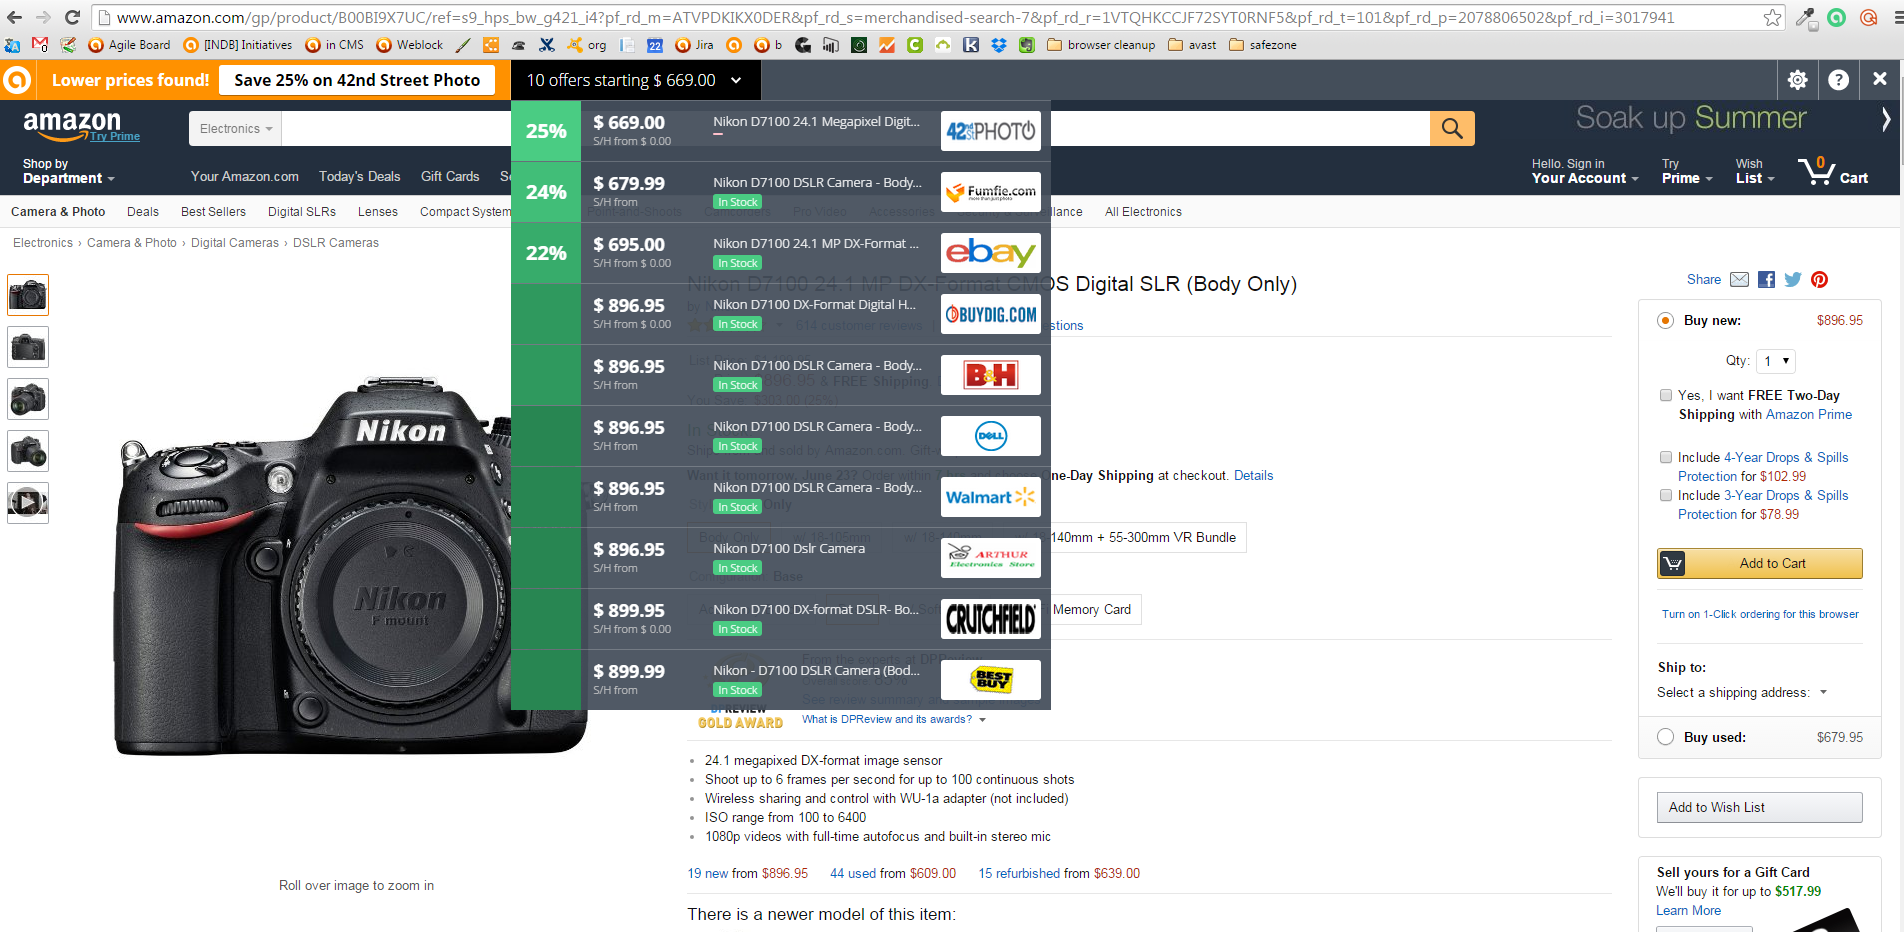 Avast SafePrice finds the best prices from trusted retailers